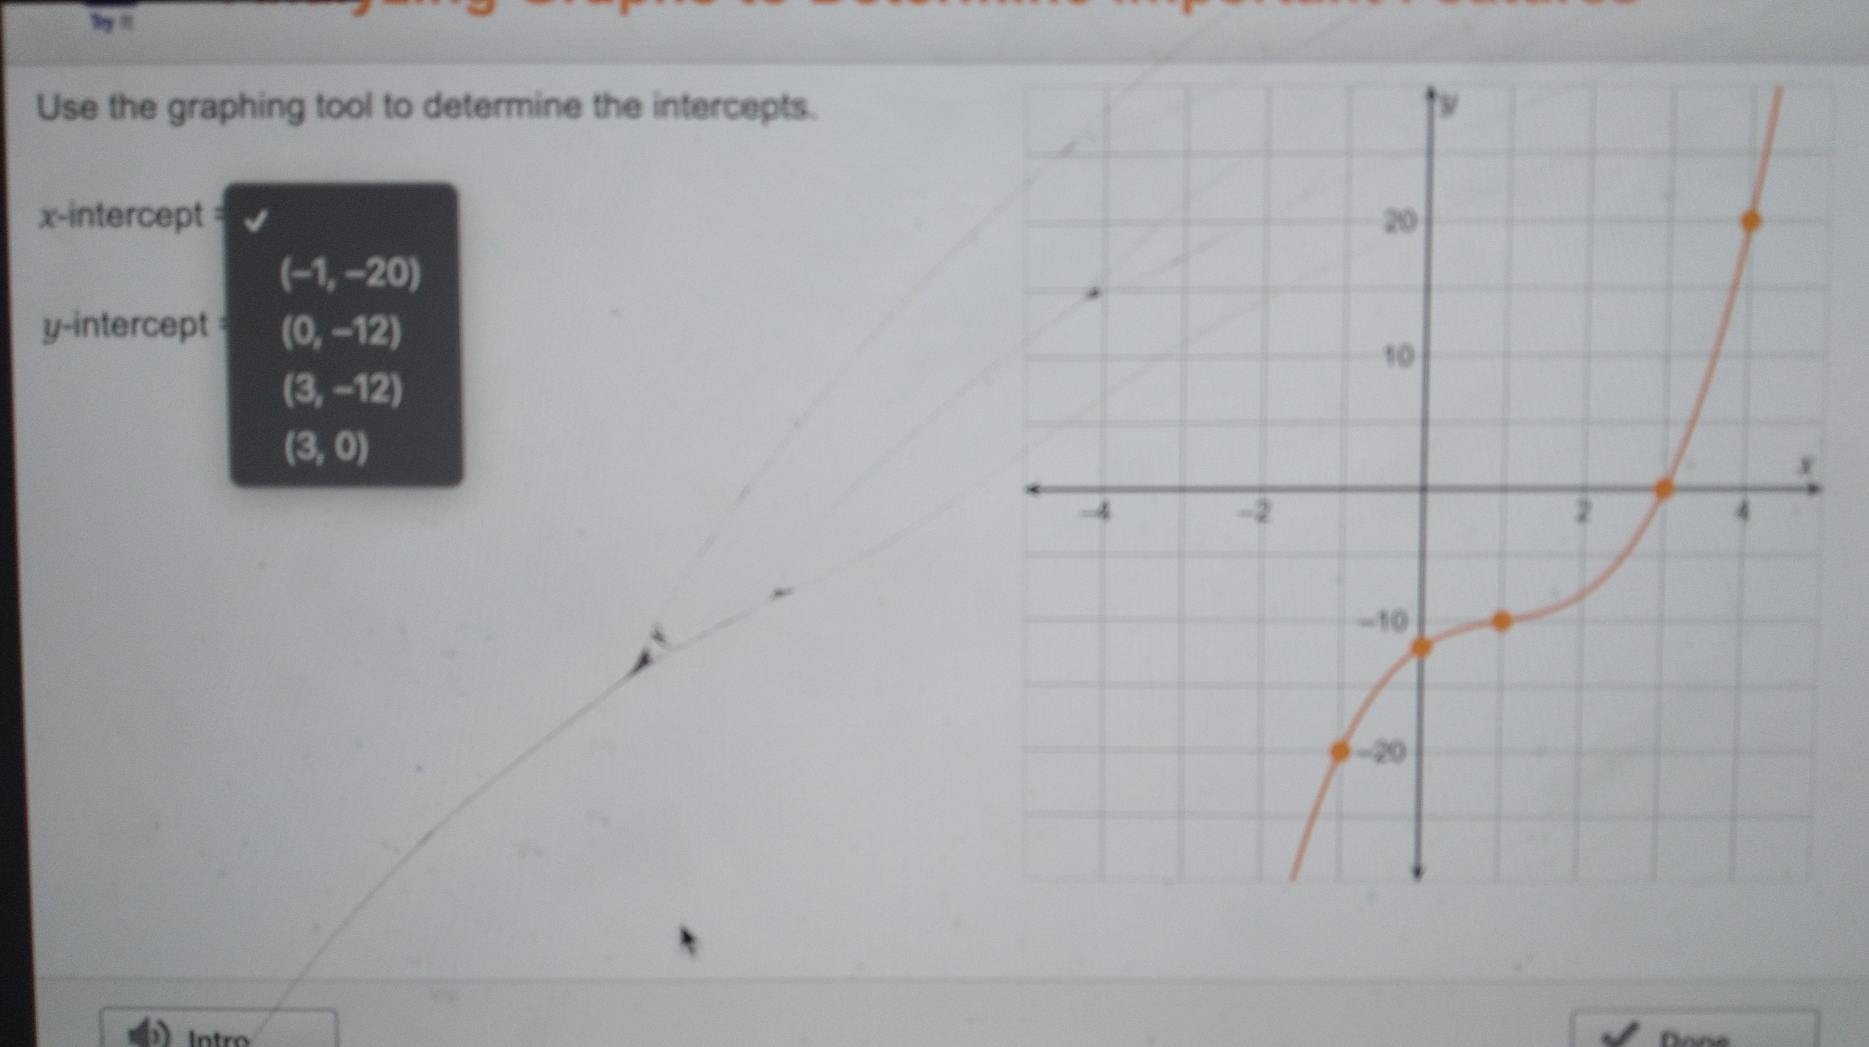 by l Use the graphing tool to determine the intercepts. x-intercept= -1,-20 y-intercept = 0,-12 3,-12 3,0 Intro